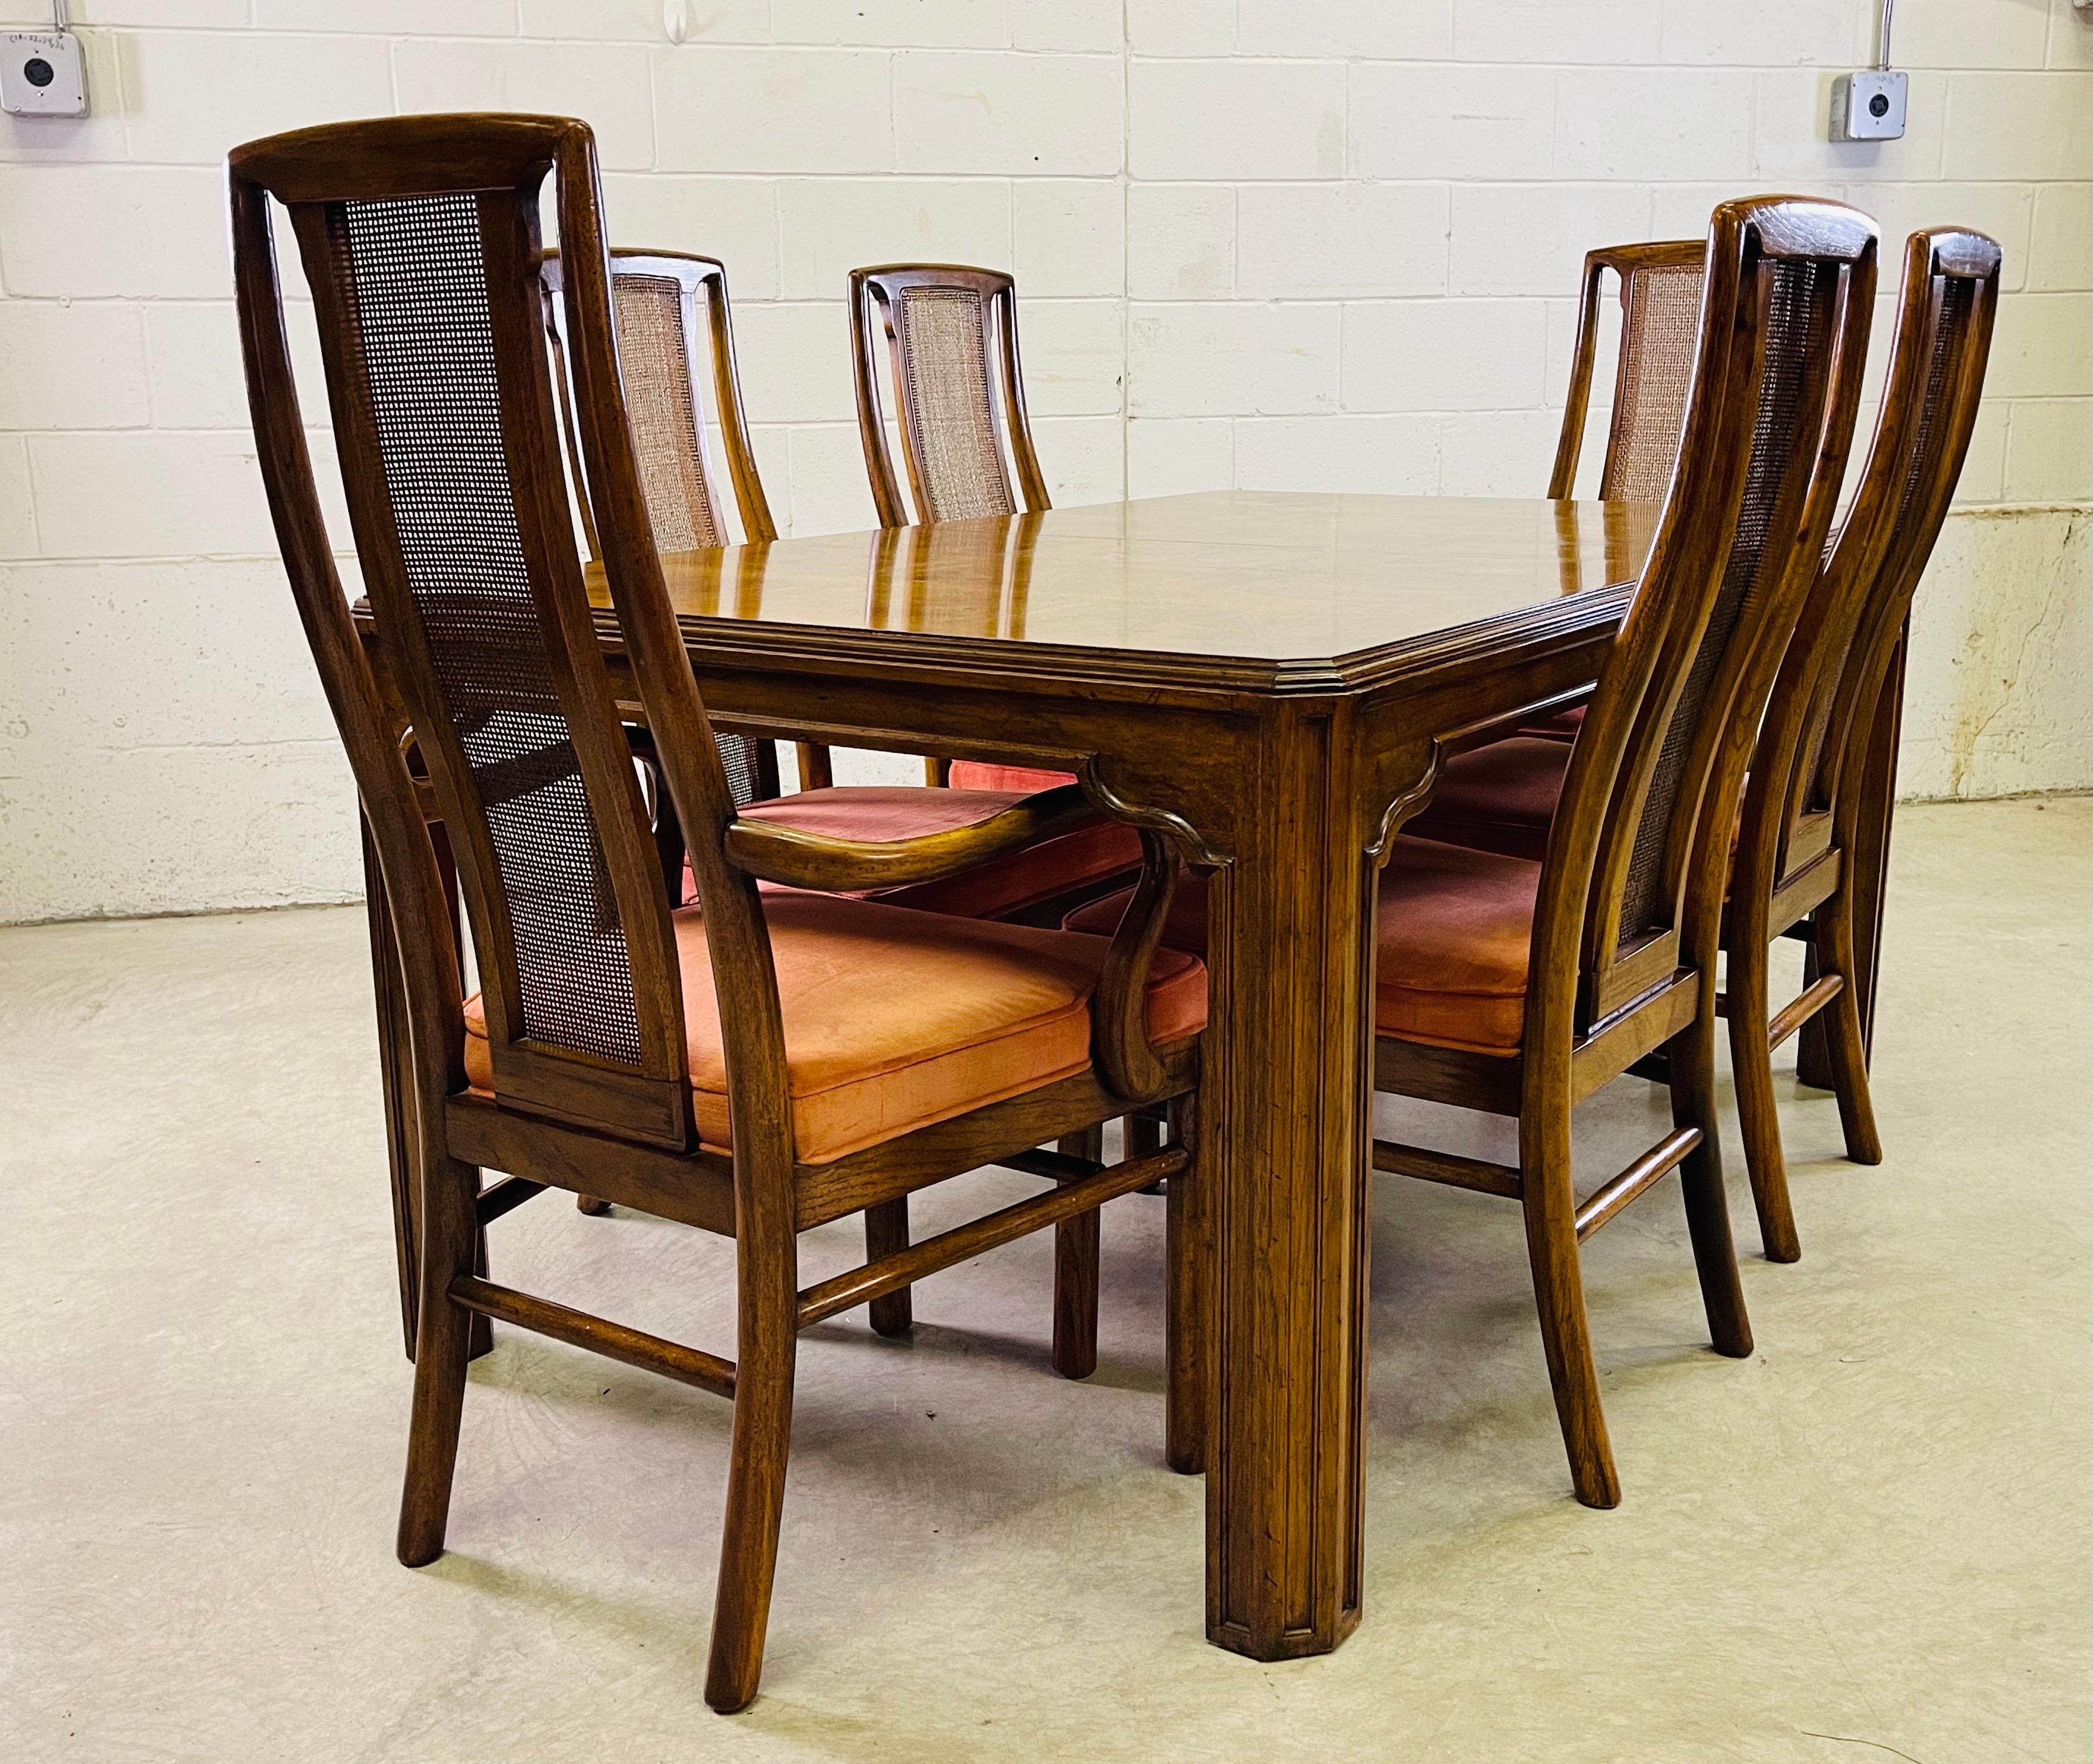 Vintage Drexel Heritage Sketchbook dining table with six chairs. The chairs are curved with a cane back and has two arm chairs. The table is a block style burlwood. The table comes with two additional boards at 20”L each. The table fully open is